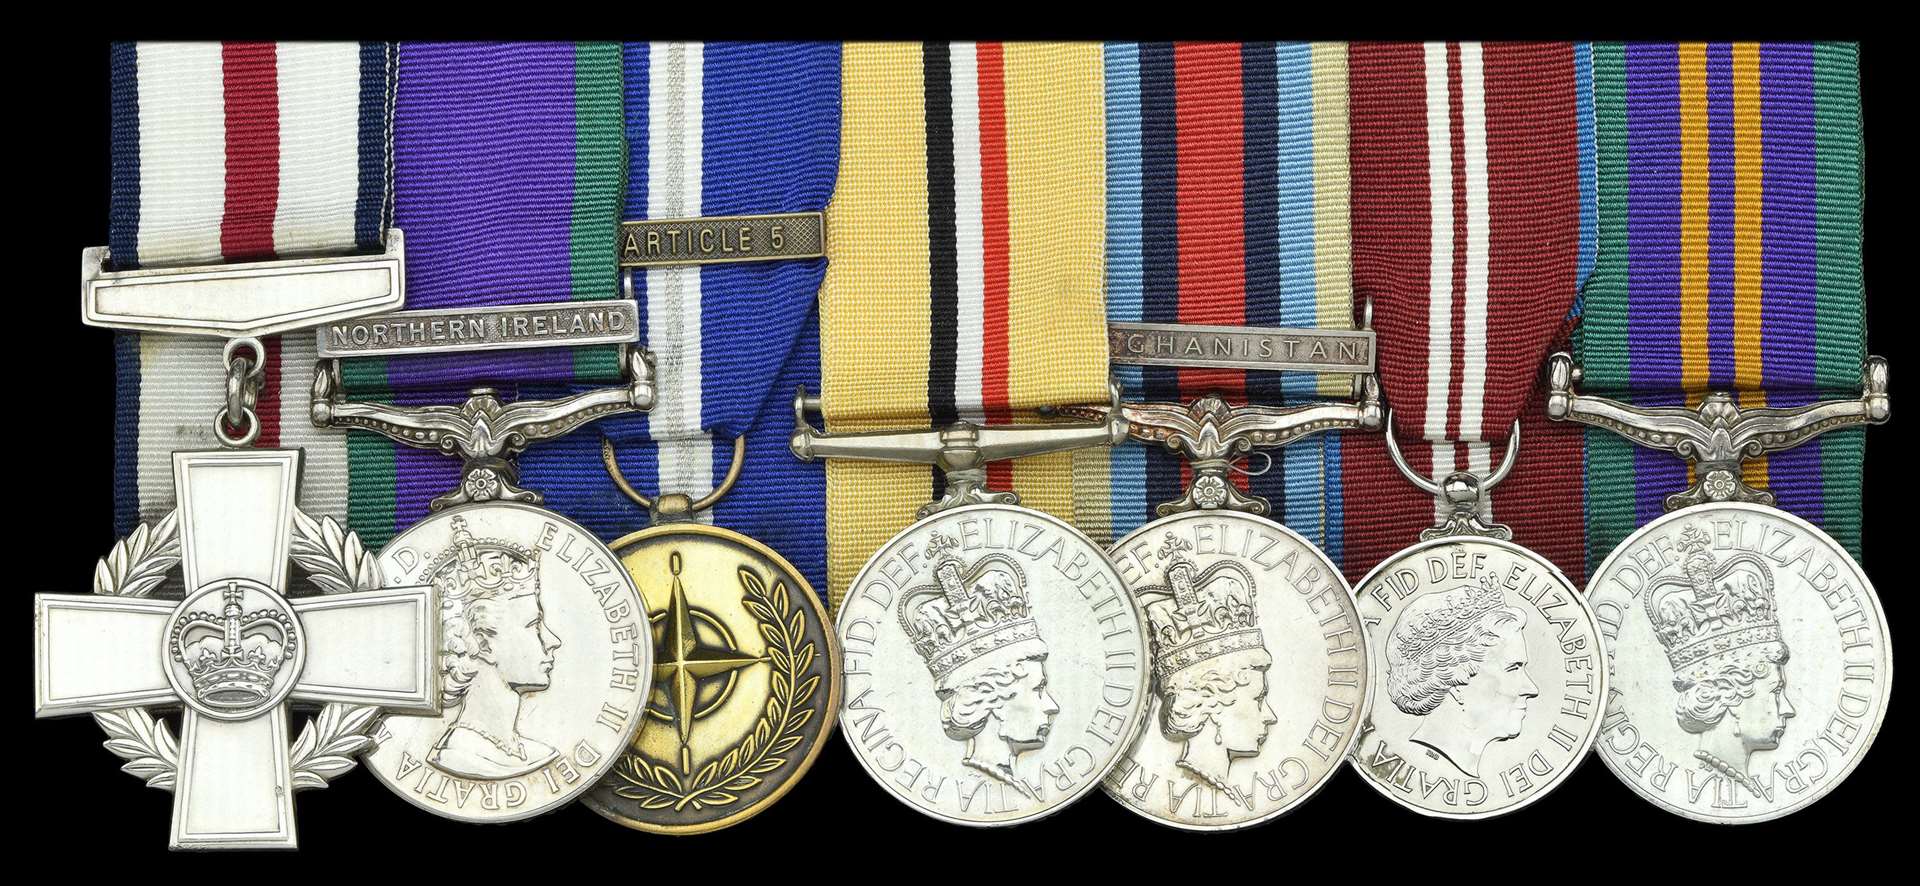 Among the medals being sold are a General Service Medal, the Operational Service Medal for Afghanistan and the Jubilee Medal (Dix Noonan Webb/PA)